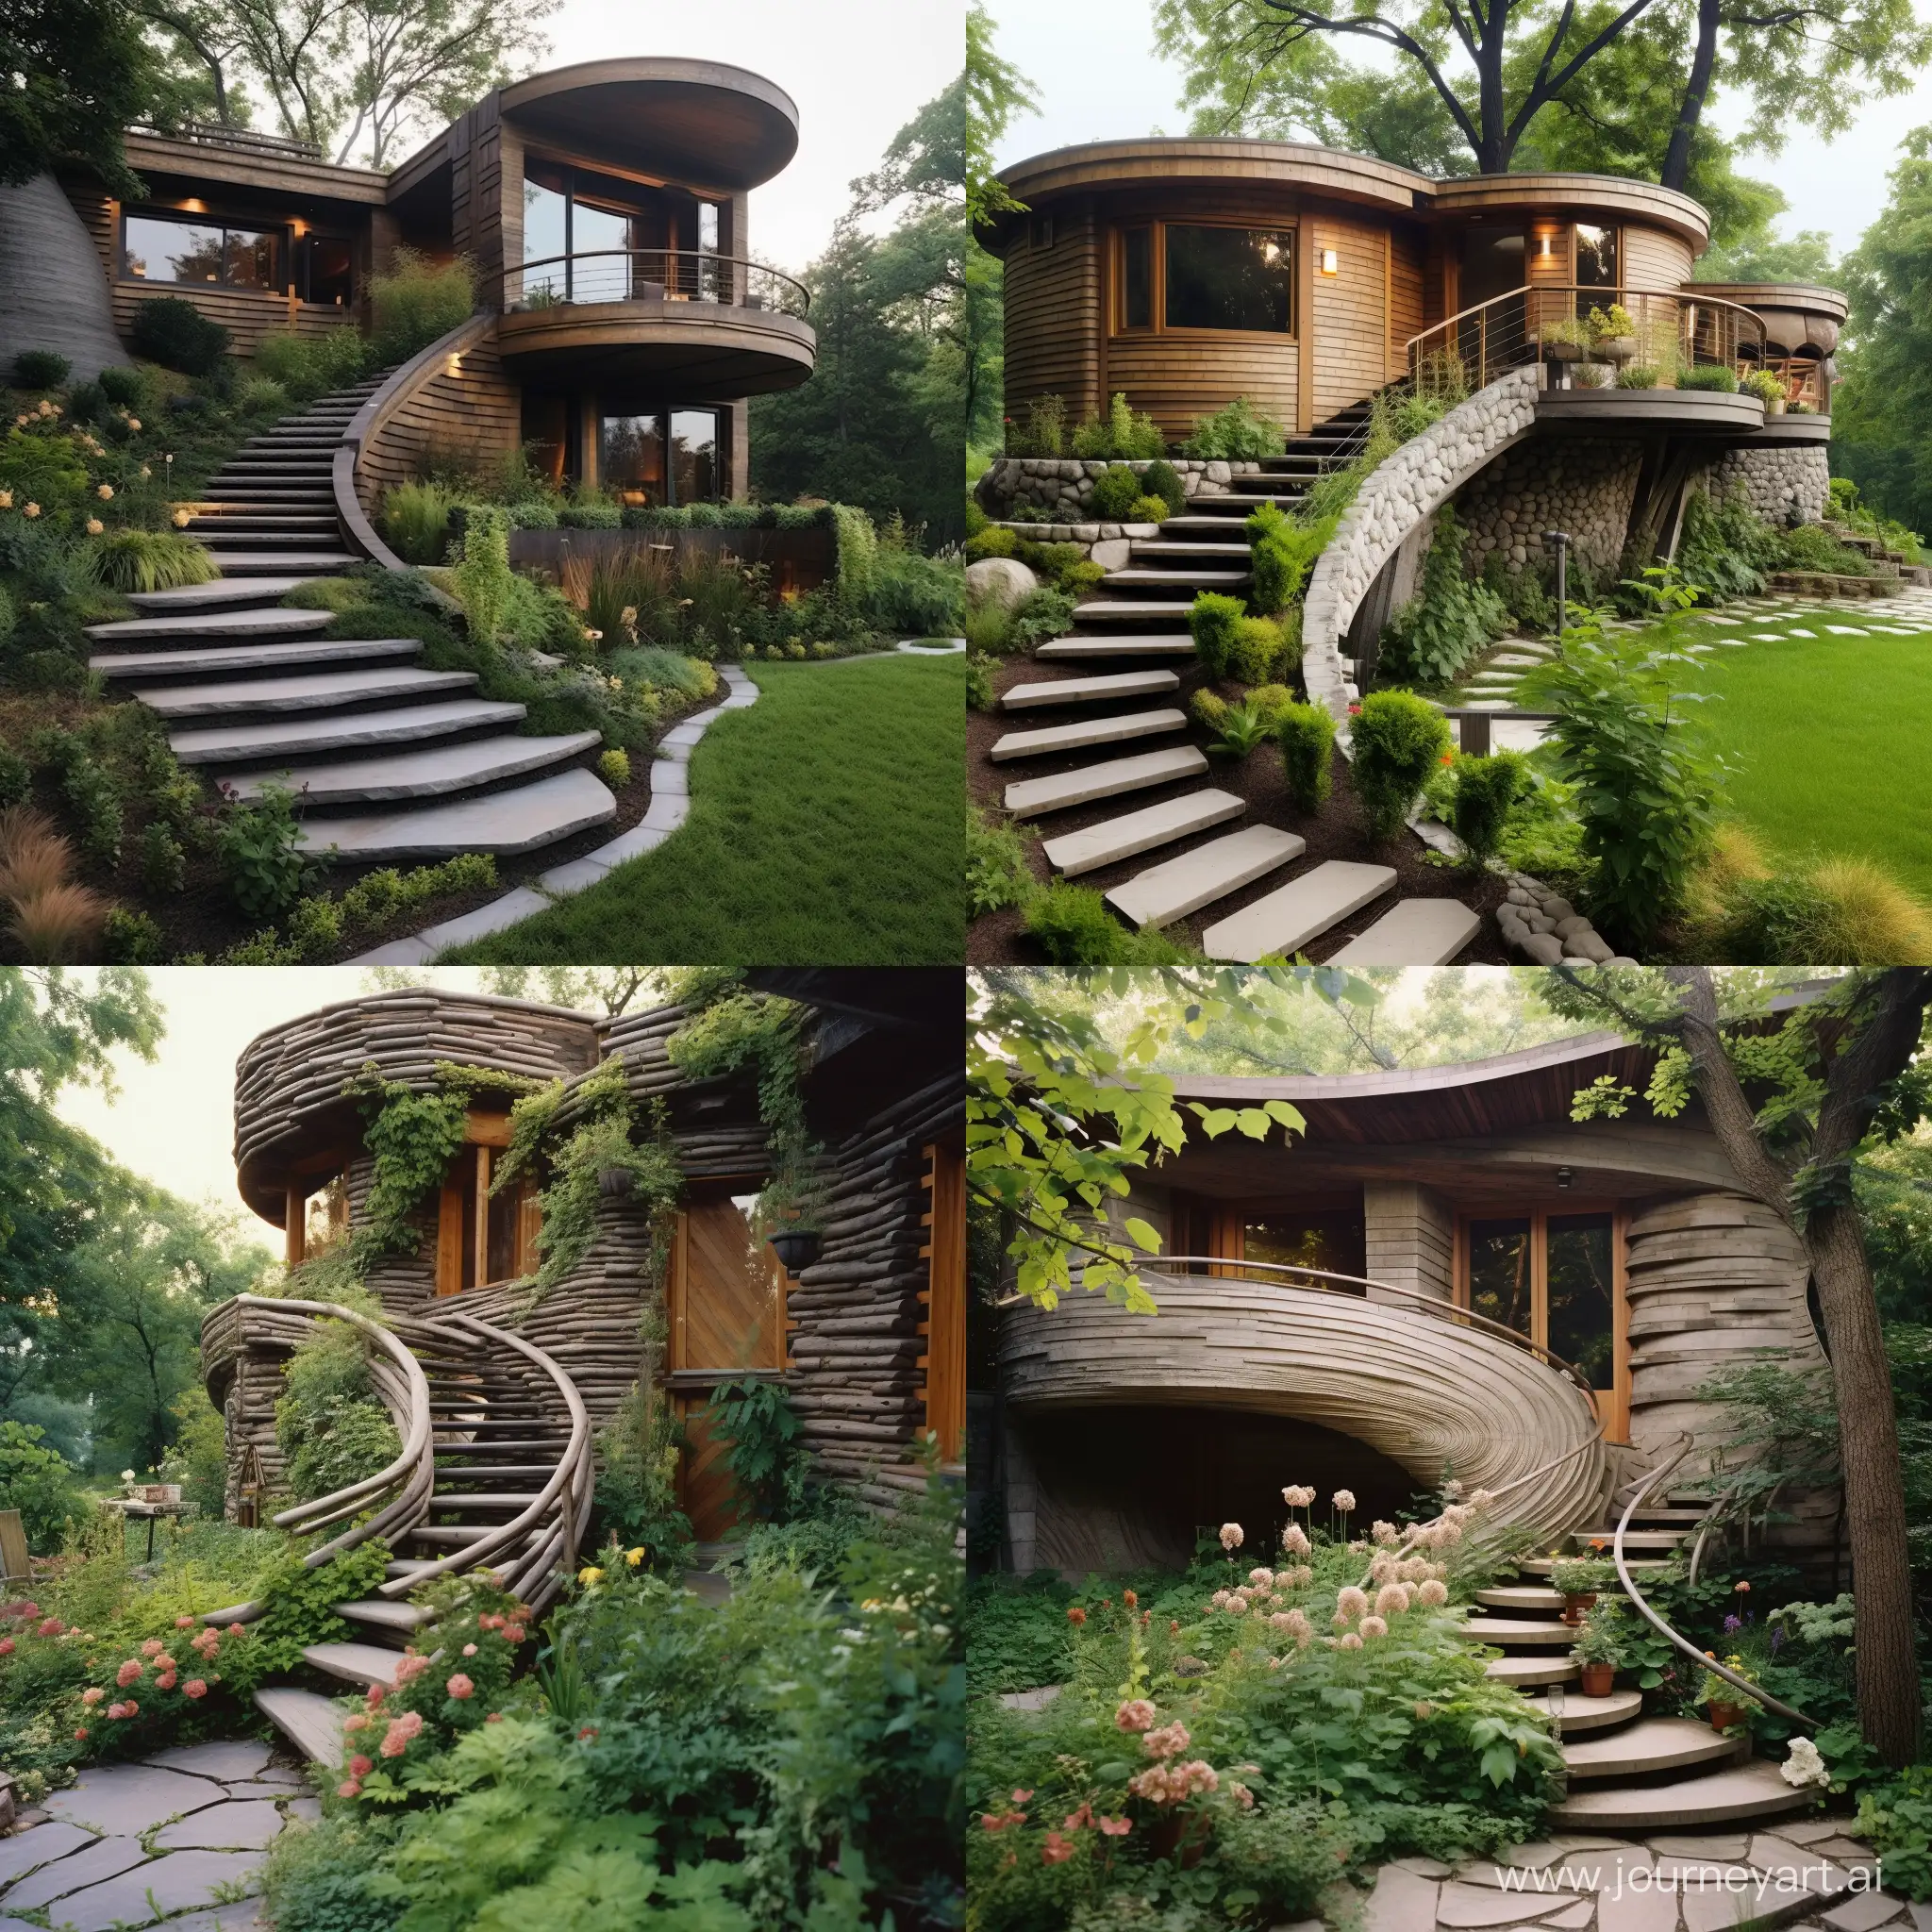 Spiral-Inclined-Garden-Stairs-Surrounding-Log-Cabin-with-Concrete-Outer-Walls